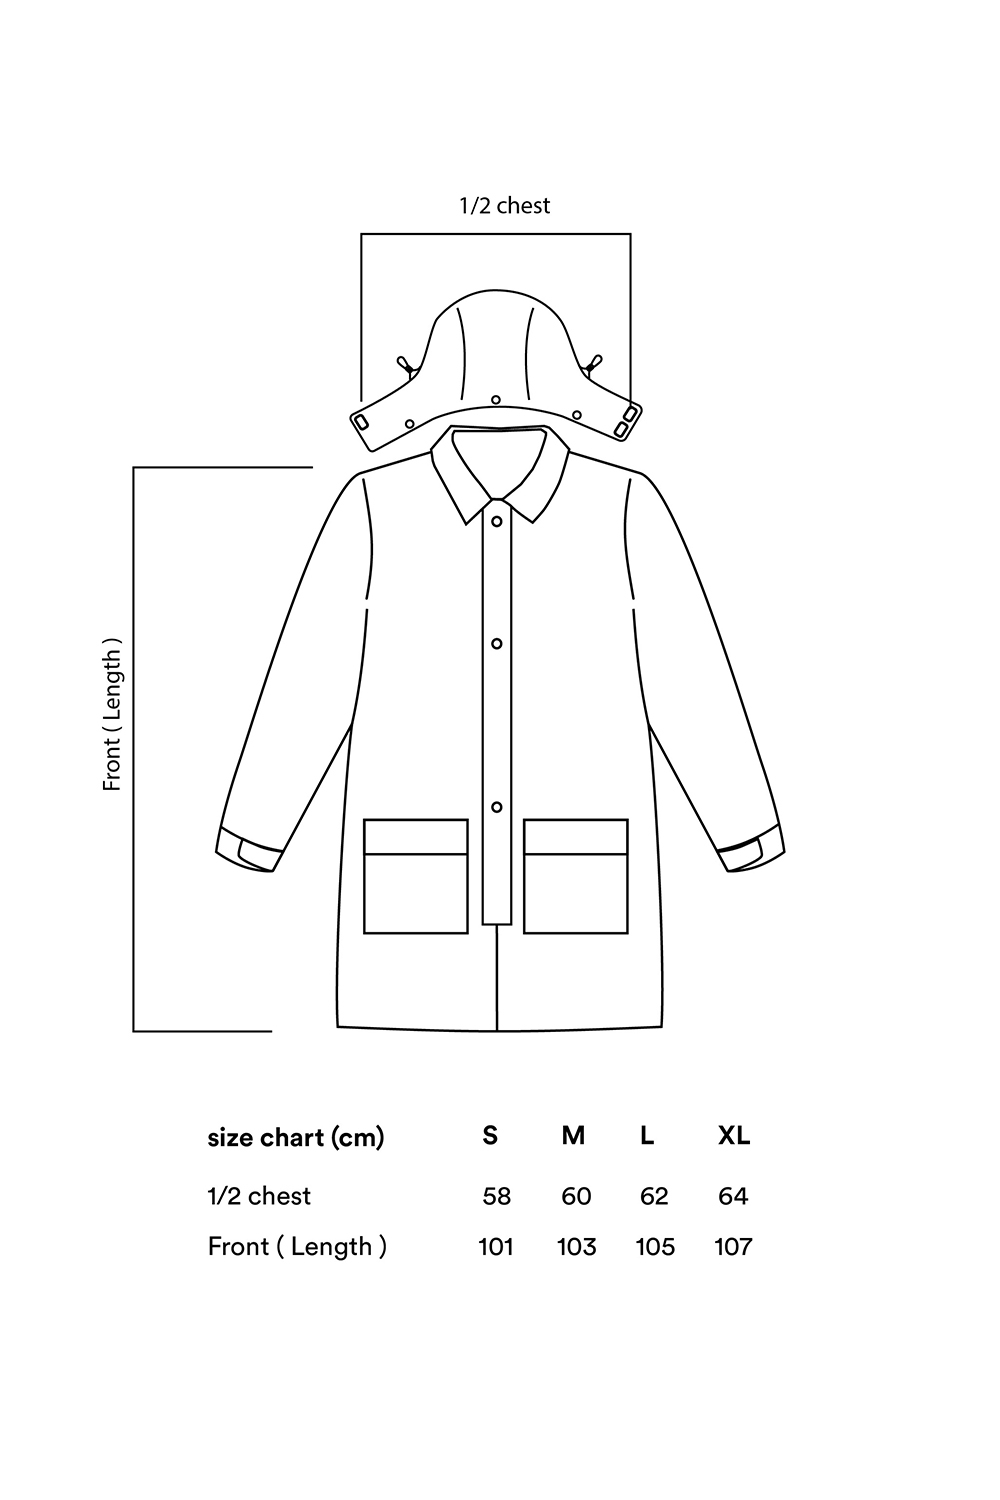 size chart locng coat 